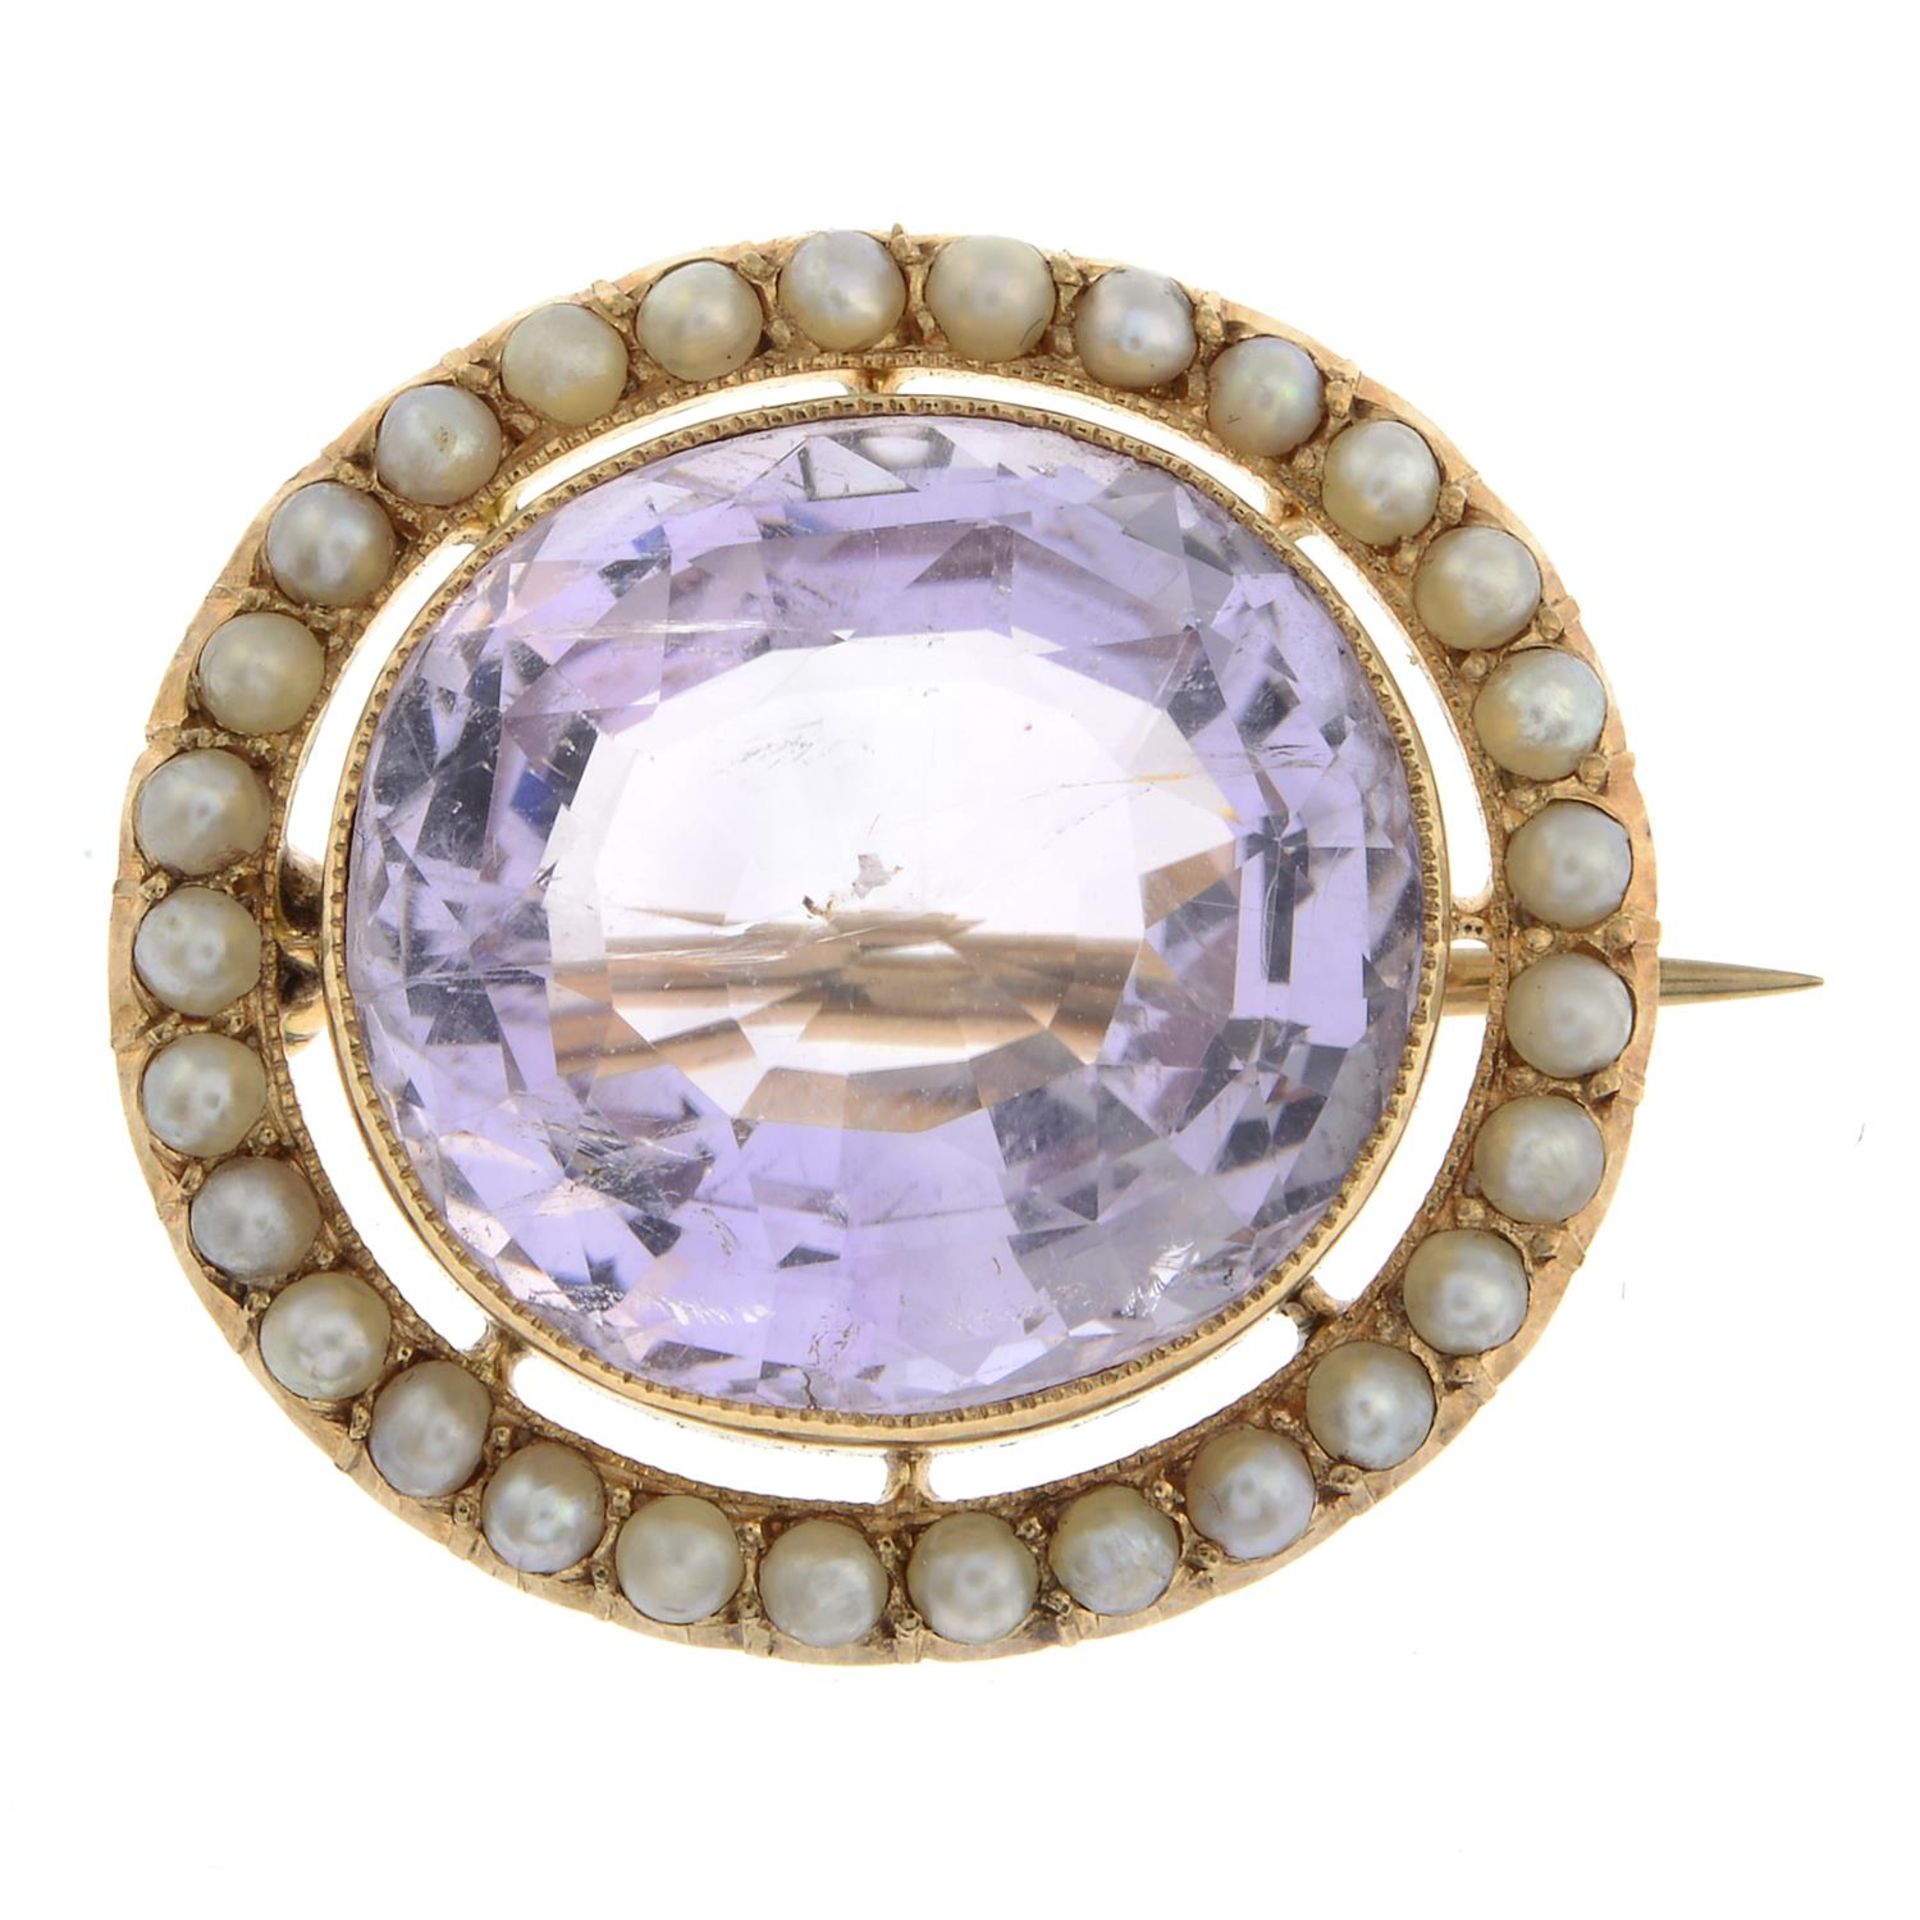 An early 20th century 15ct gold amethyst and split pearl brooch. - Image 2 of 4